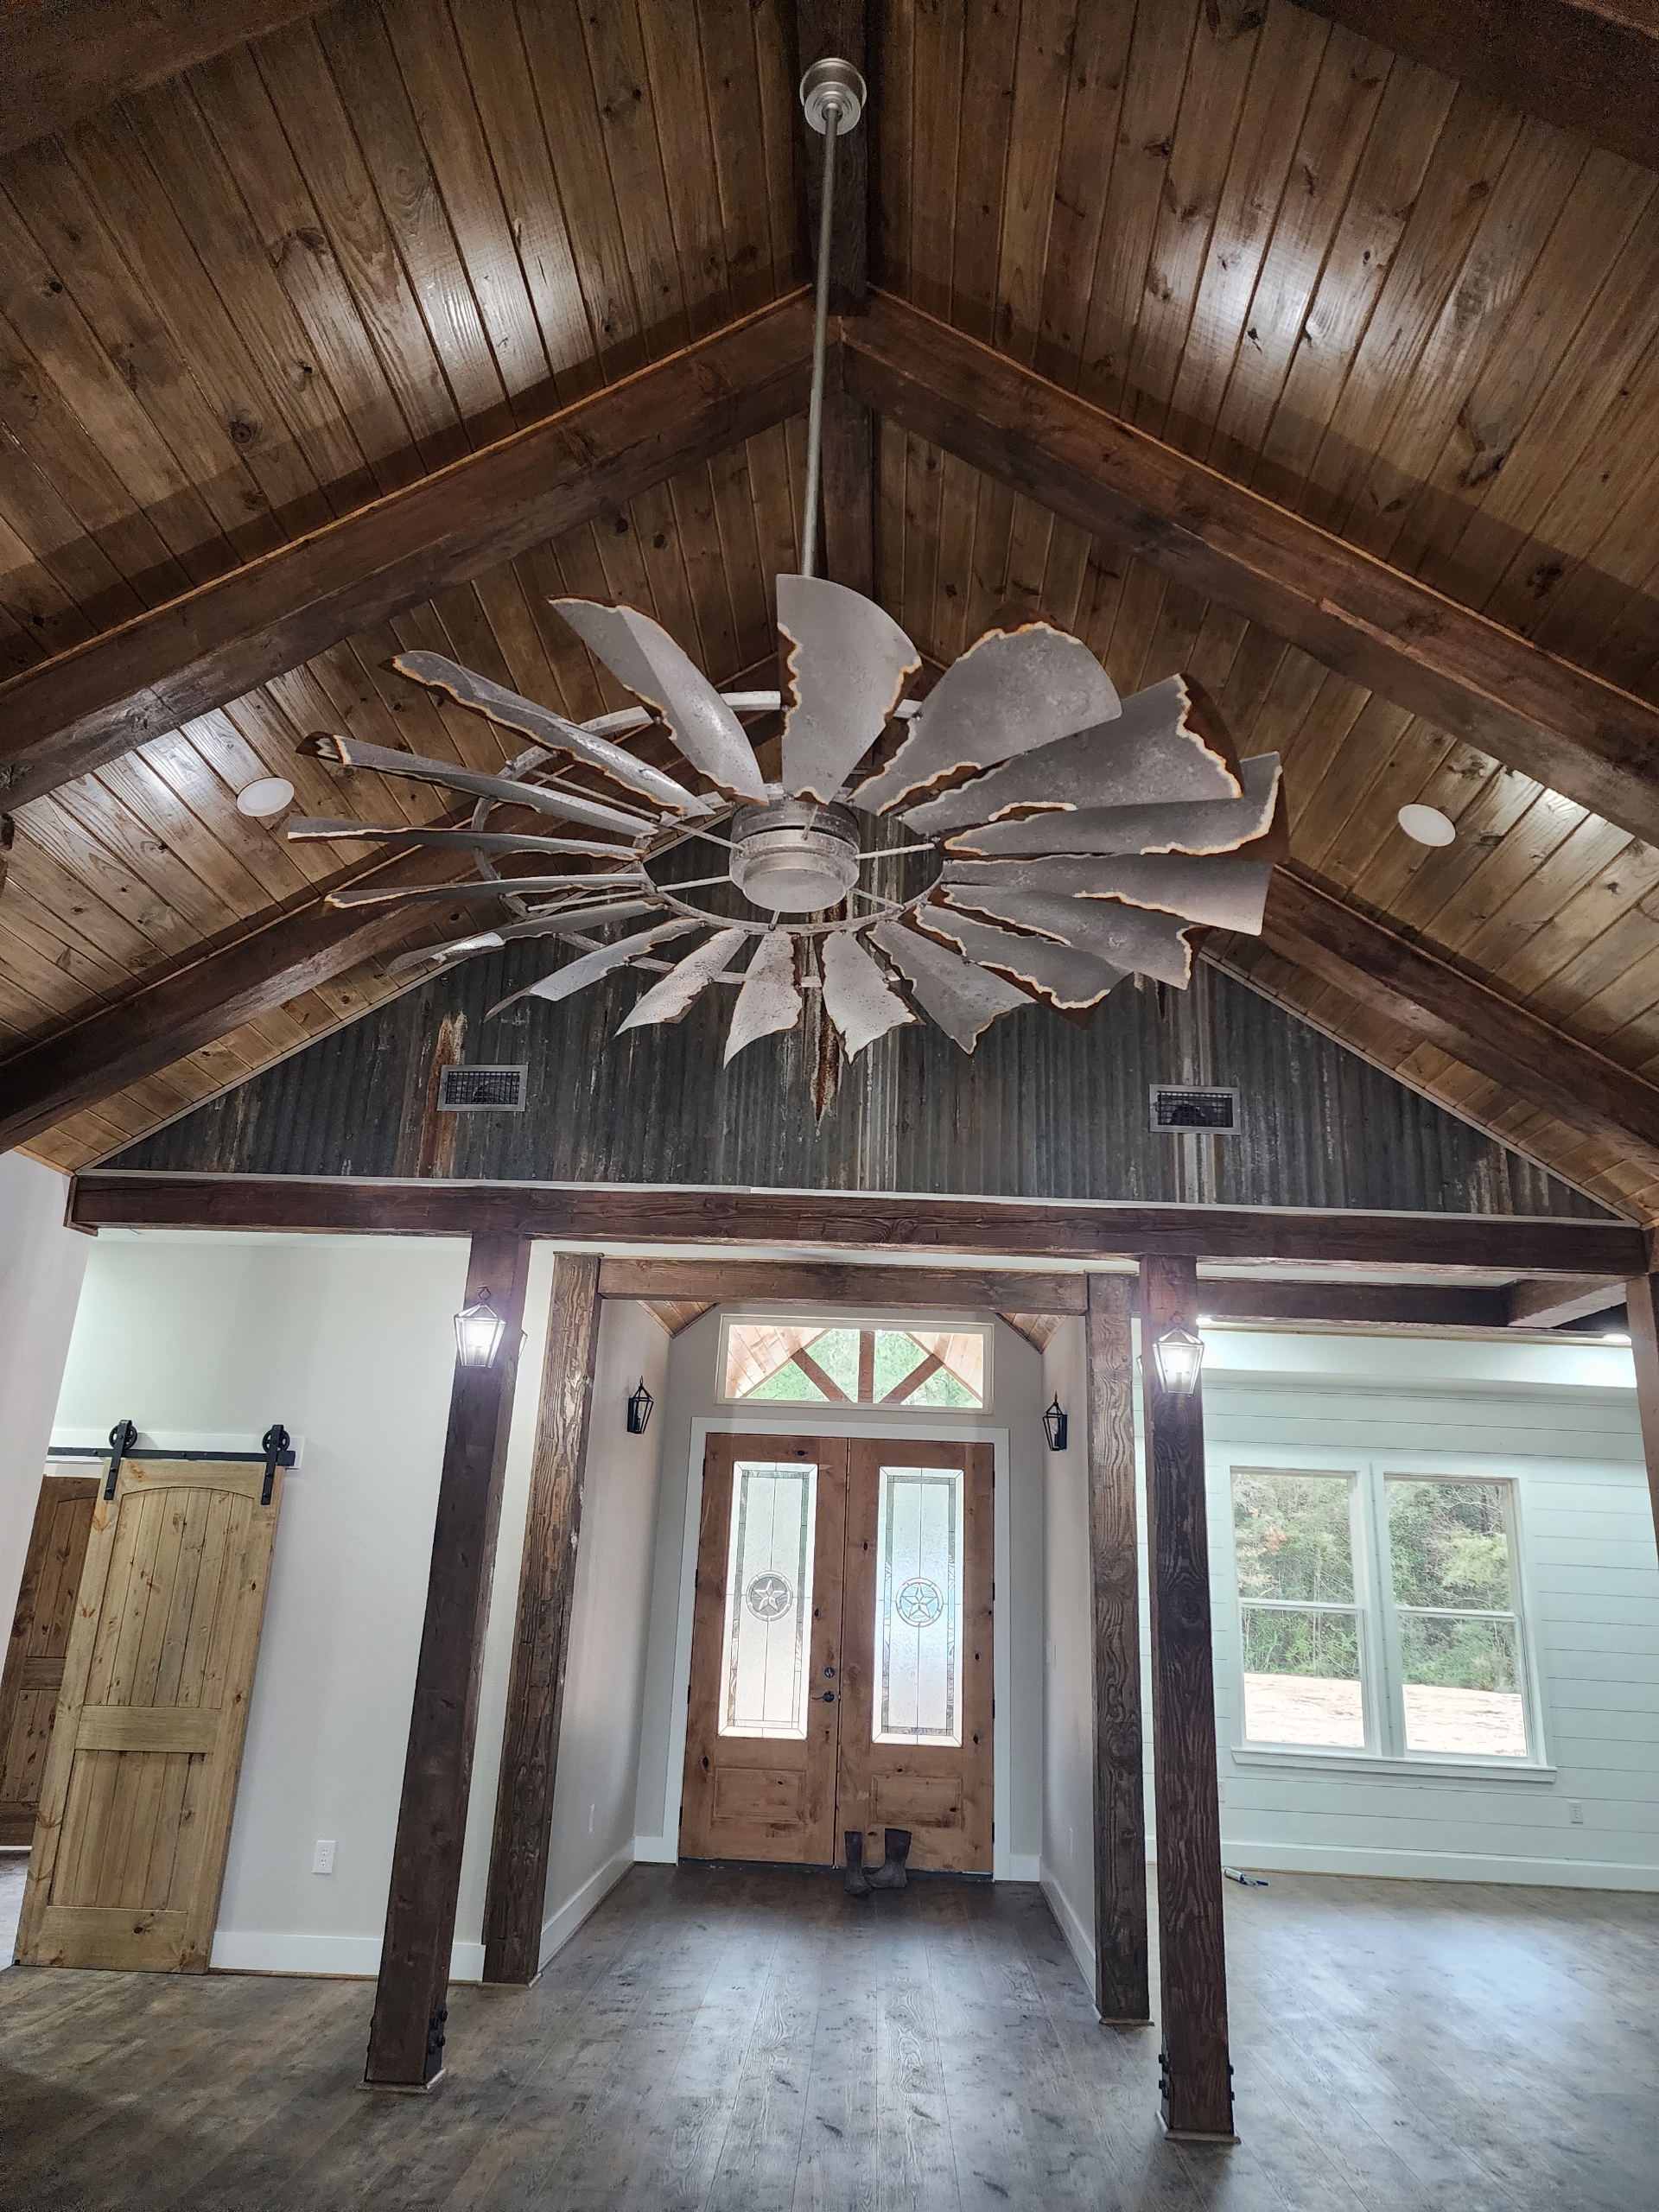 Sunflower windmill. We made this out of ceiling fan blades, the